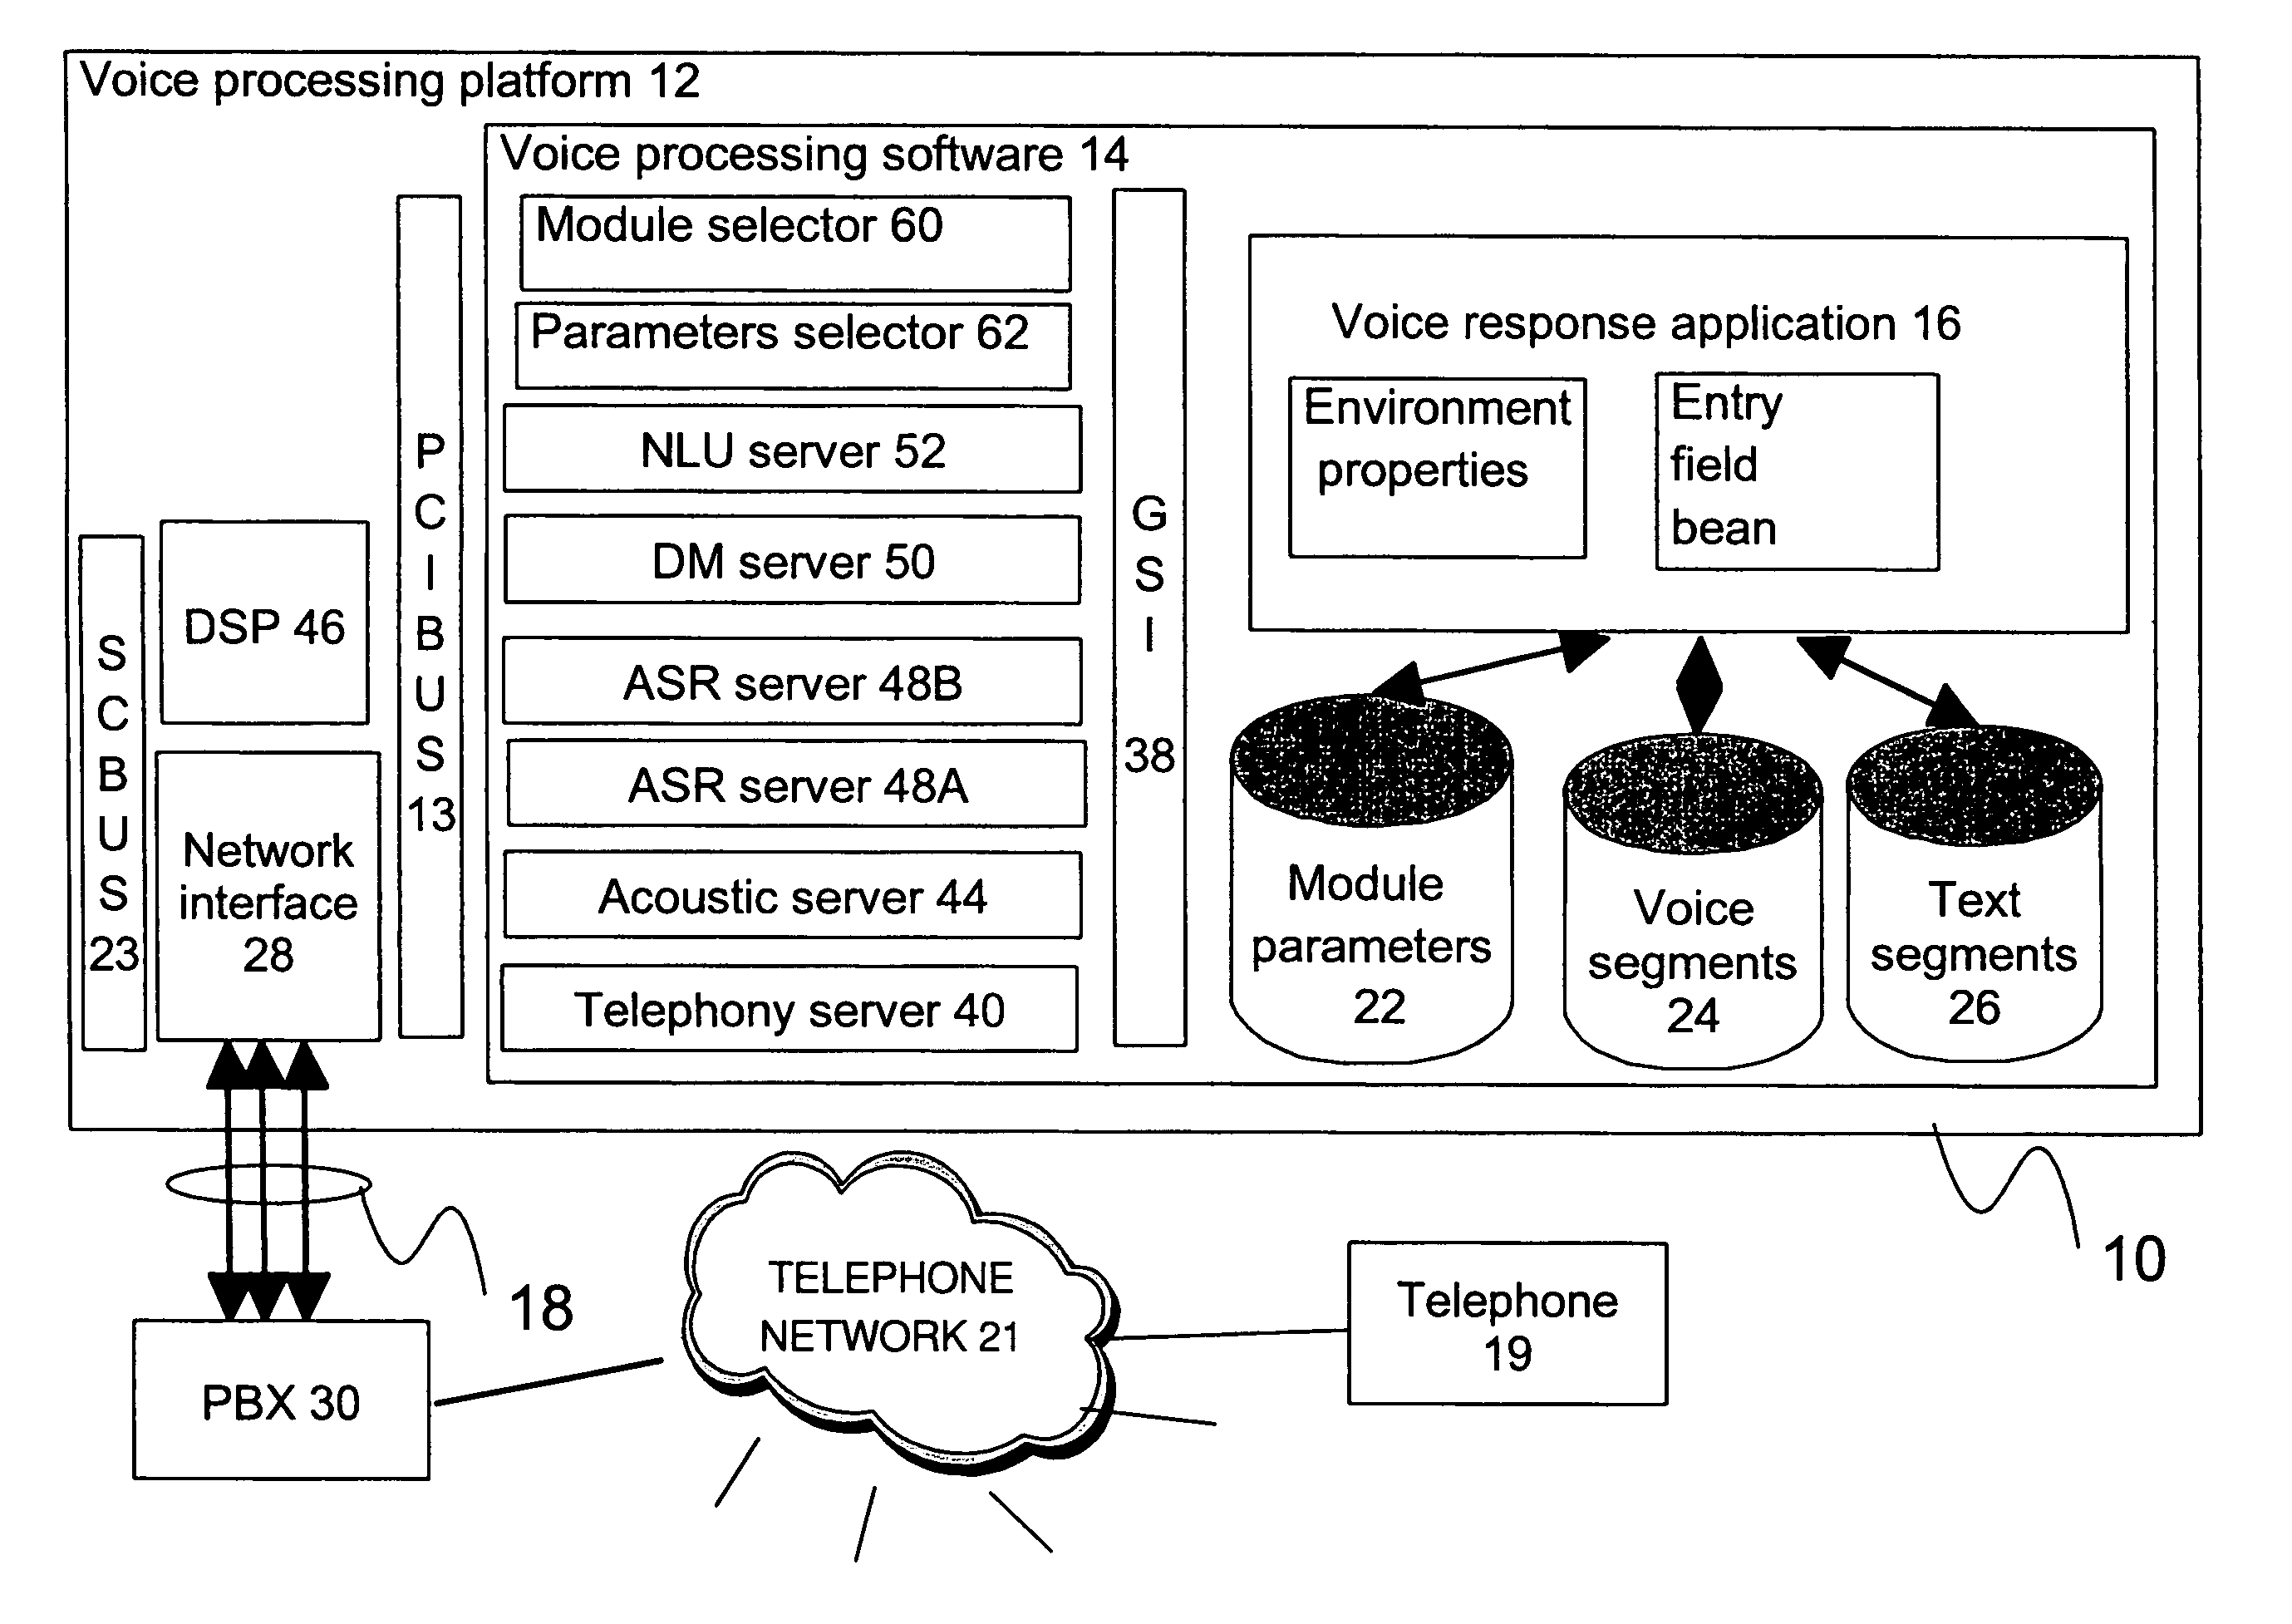 Management of speech technology modules in an interactive voice response system